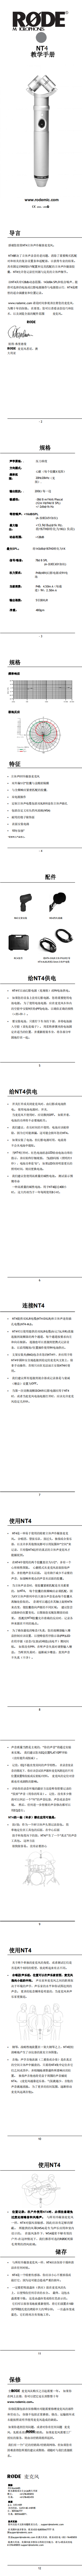 NT4_product_manual_1_12_translate_Chinese_0.png